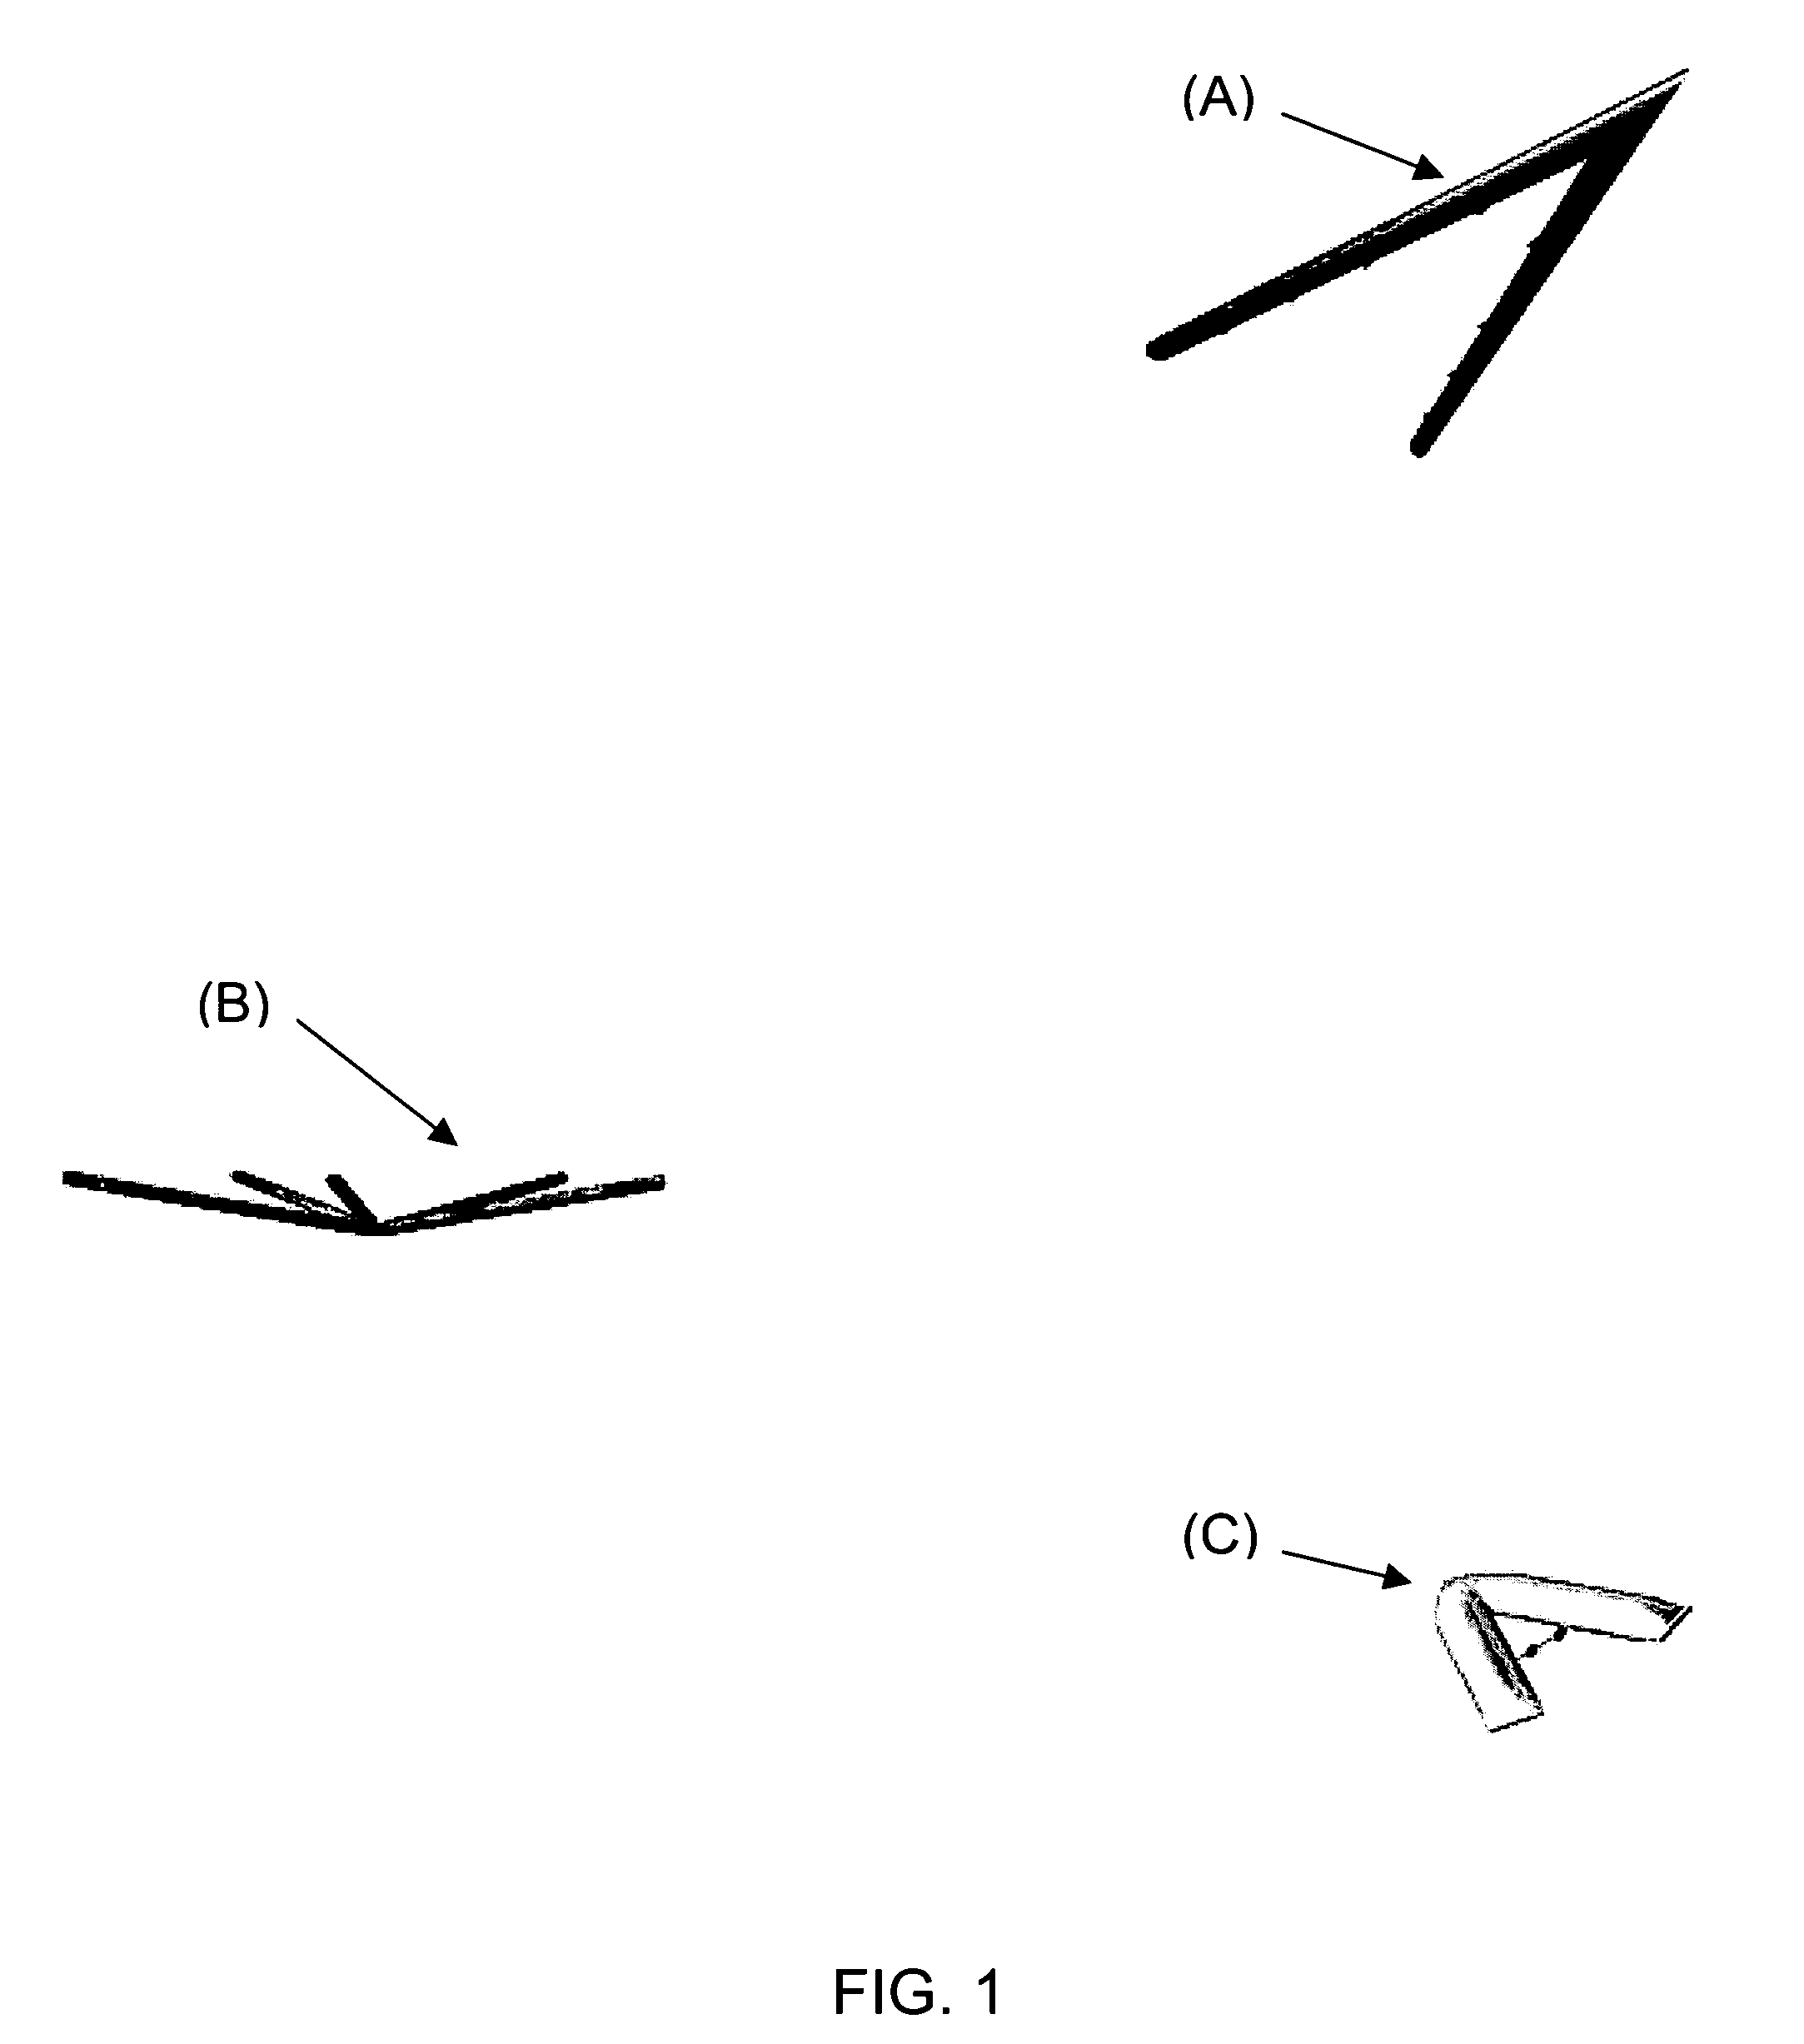 Method of traveling to Earth's orbit using lighter than air vehicles